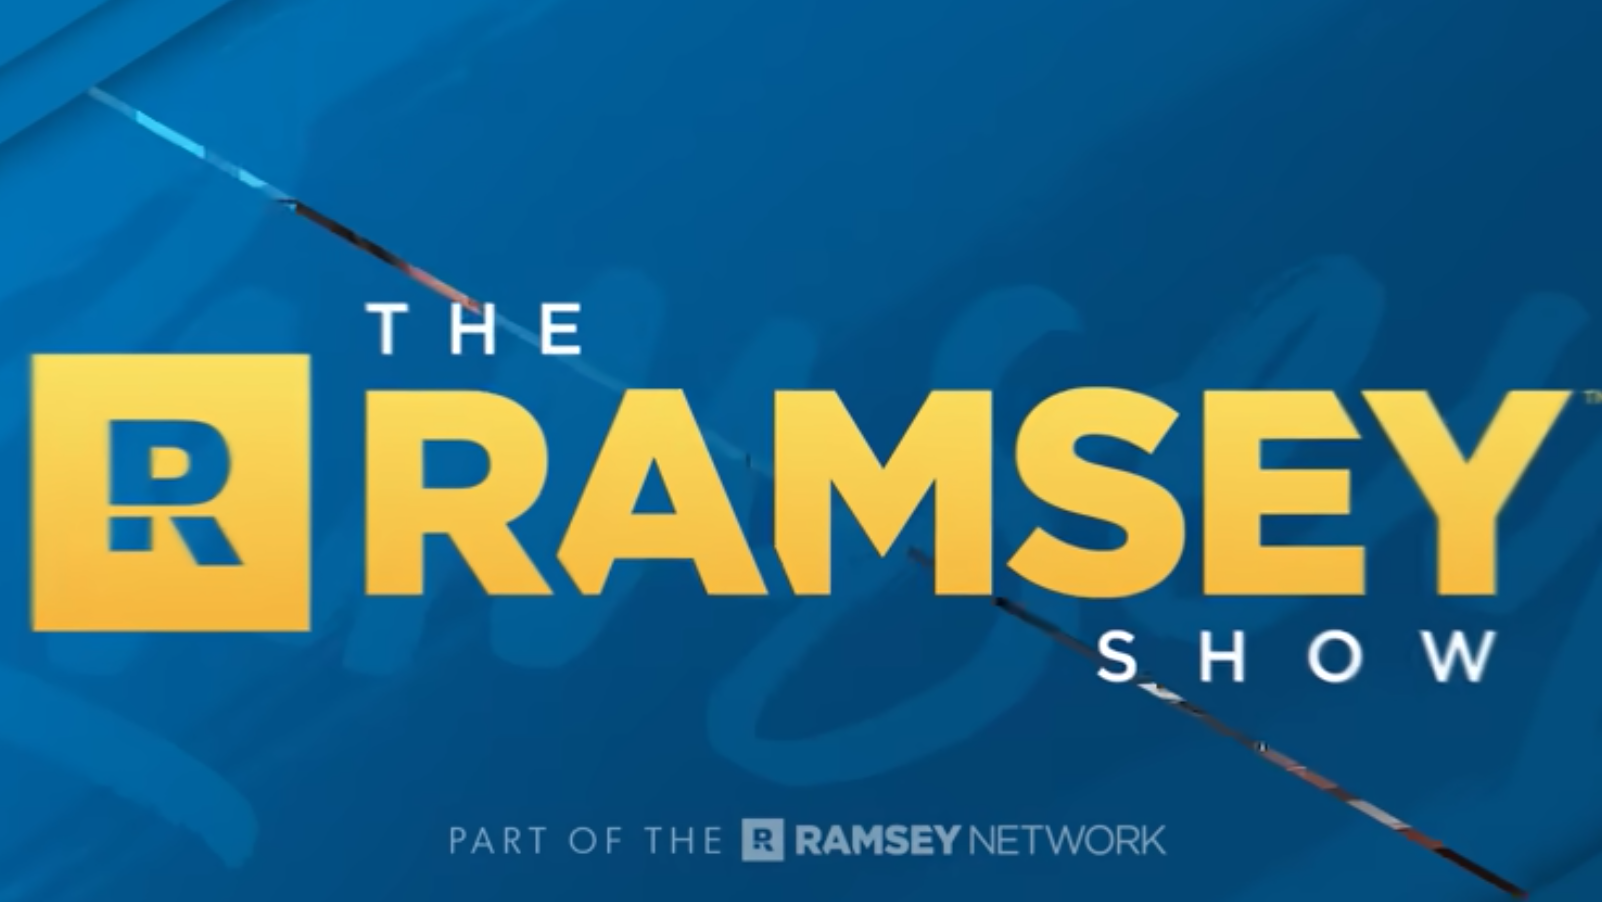 Dave Ramsey Show